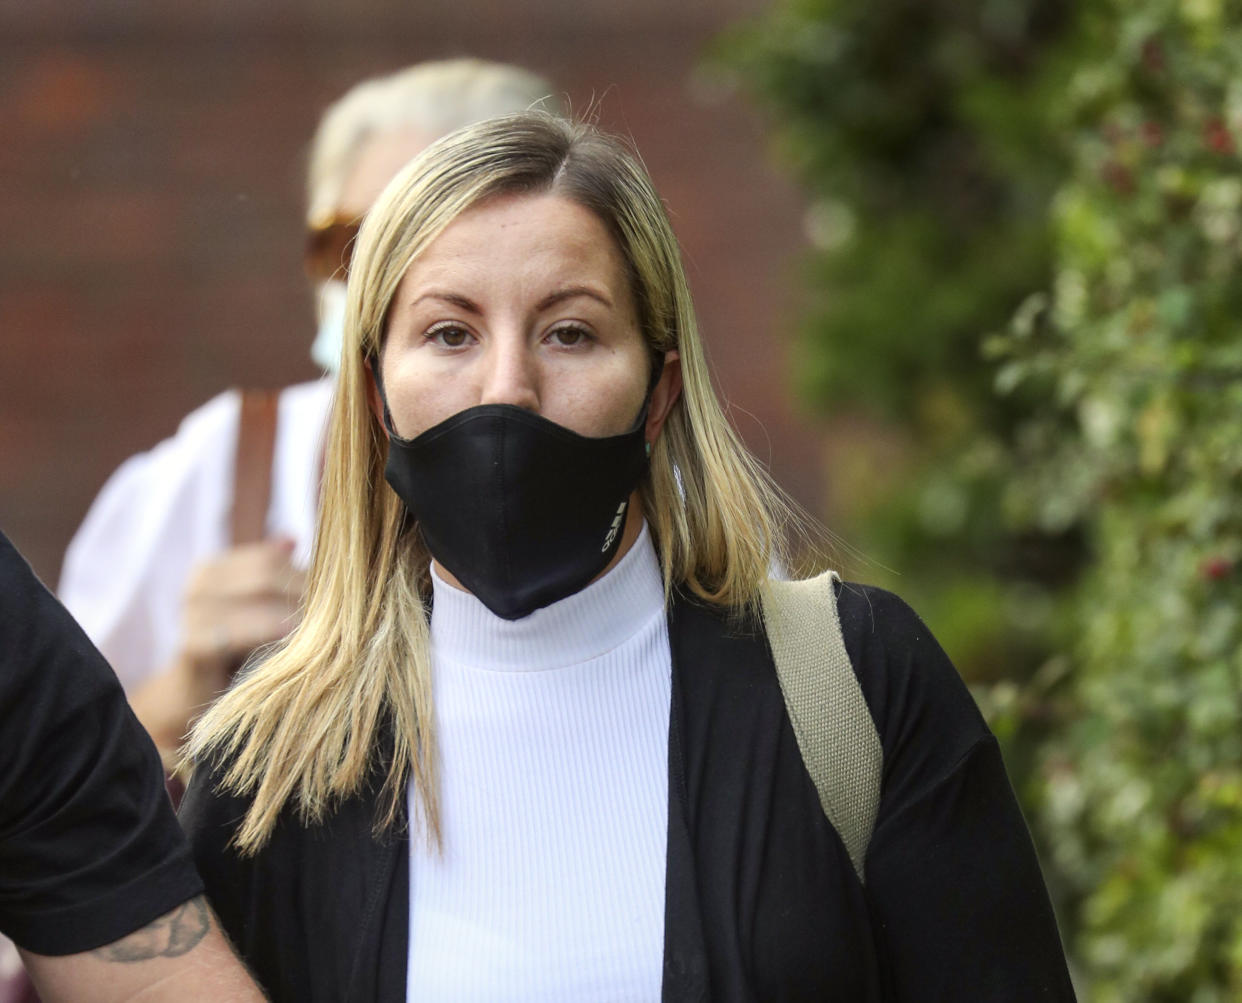 Teacher Kandice Barber, 35, leaves Aylesbury Crown Court, Buckinghamshire, after being found guilty of two sex offence charges related to sending topless Snapchat pictures to a 15-year-old student. The jury were unable to reach verdicts on three more serious charges of causing or inciting a child aged under 16 to engage in a sexual act.